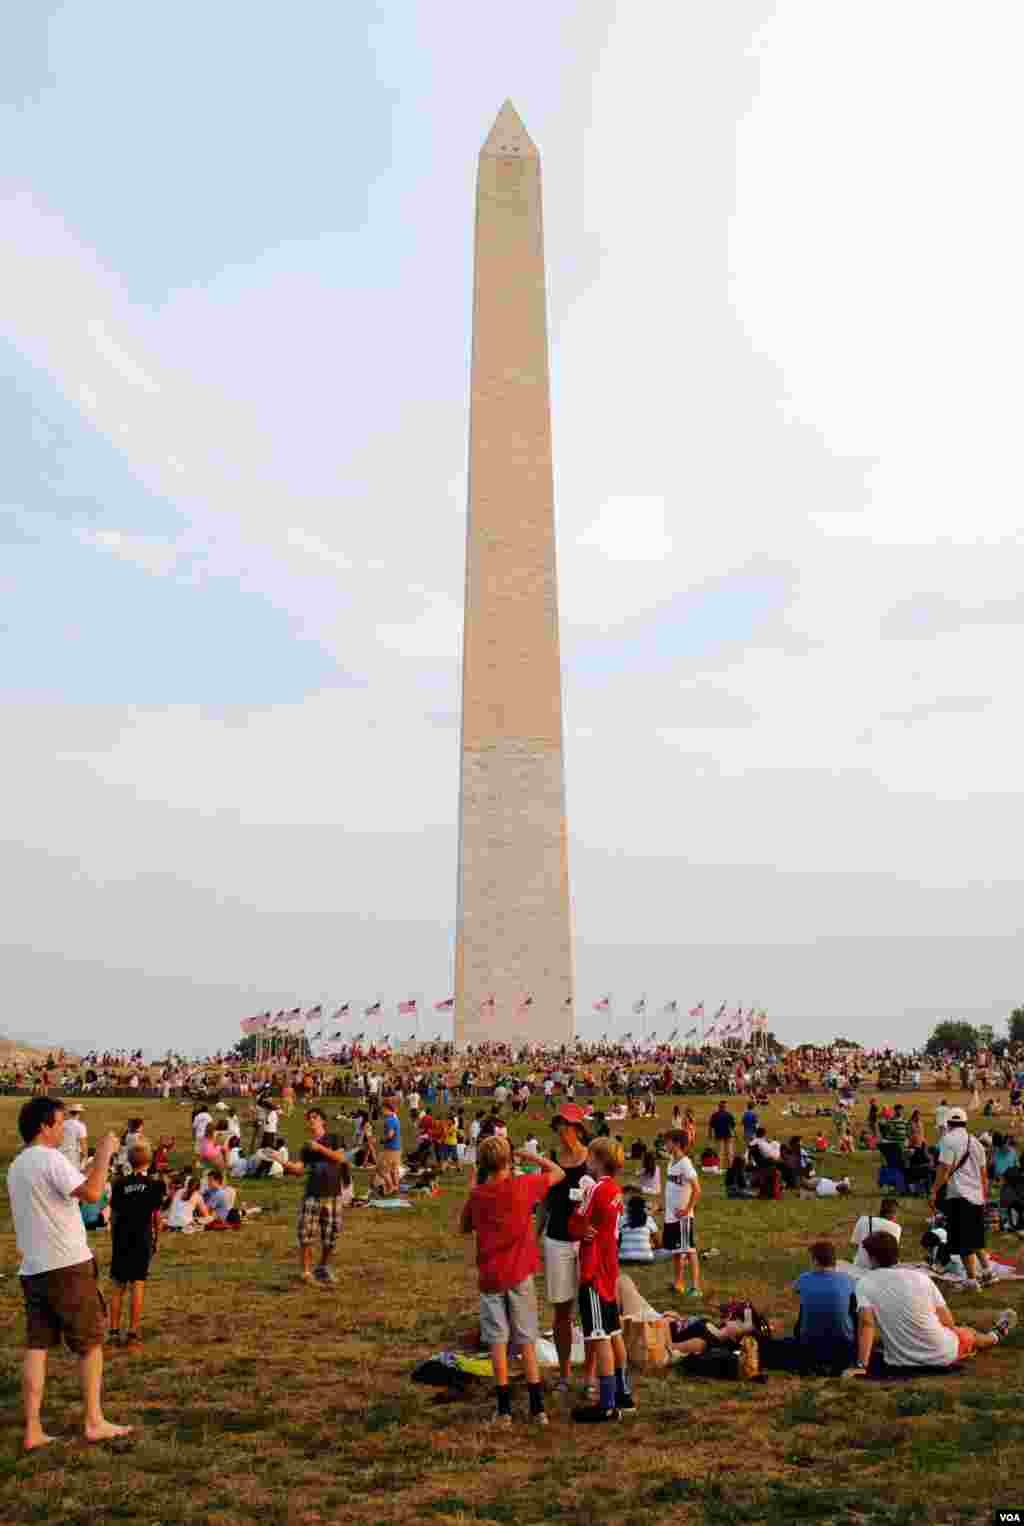 Crowds of people arrived hours early to get the best spots to watch the fireworks, Washington, July 4, 2012. (M. Lipin/VOA) 